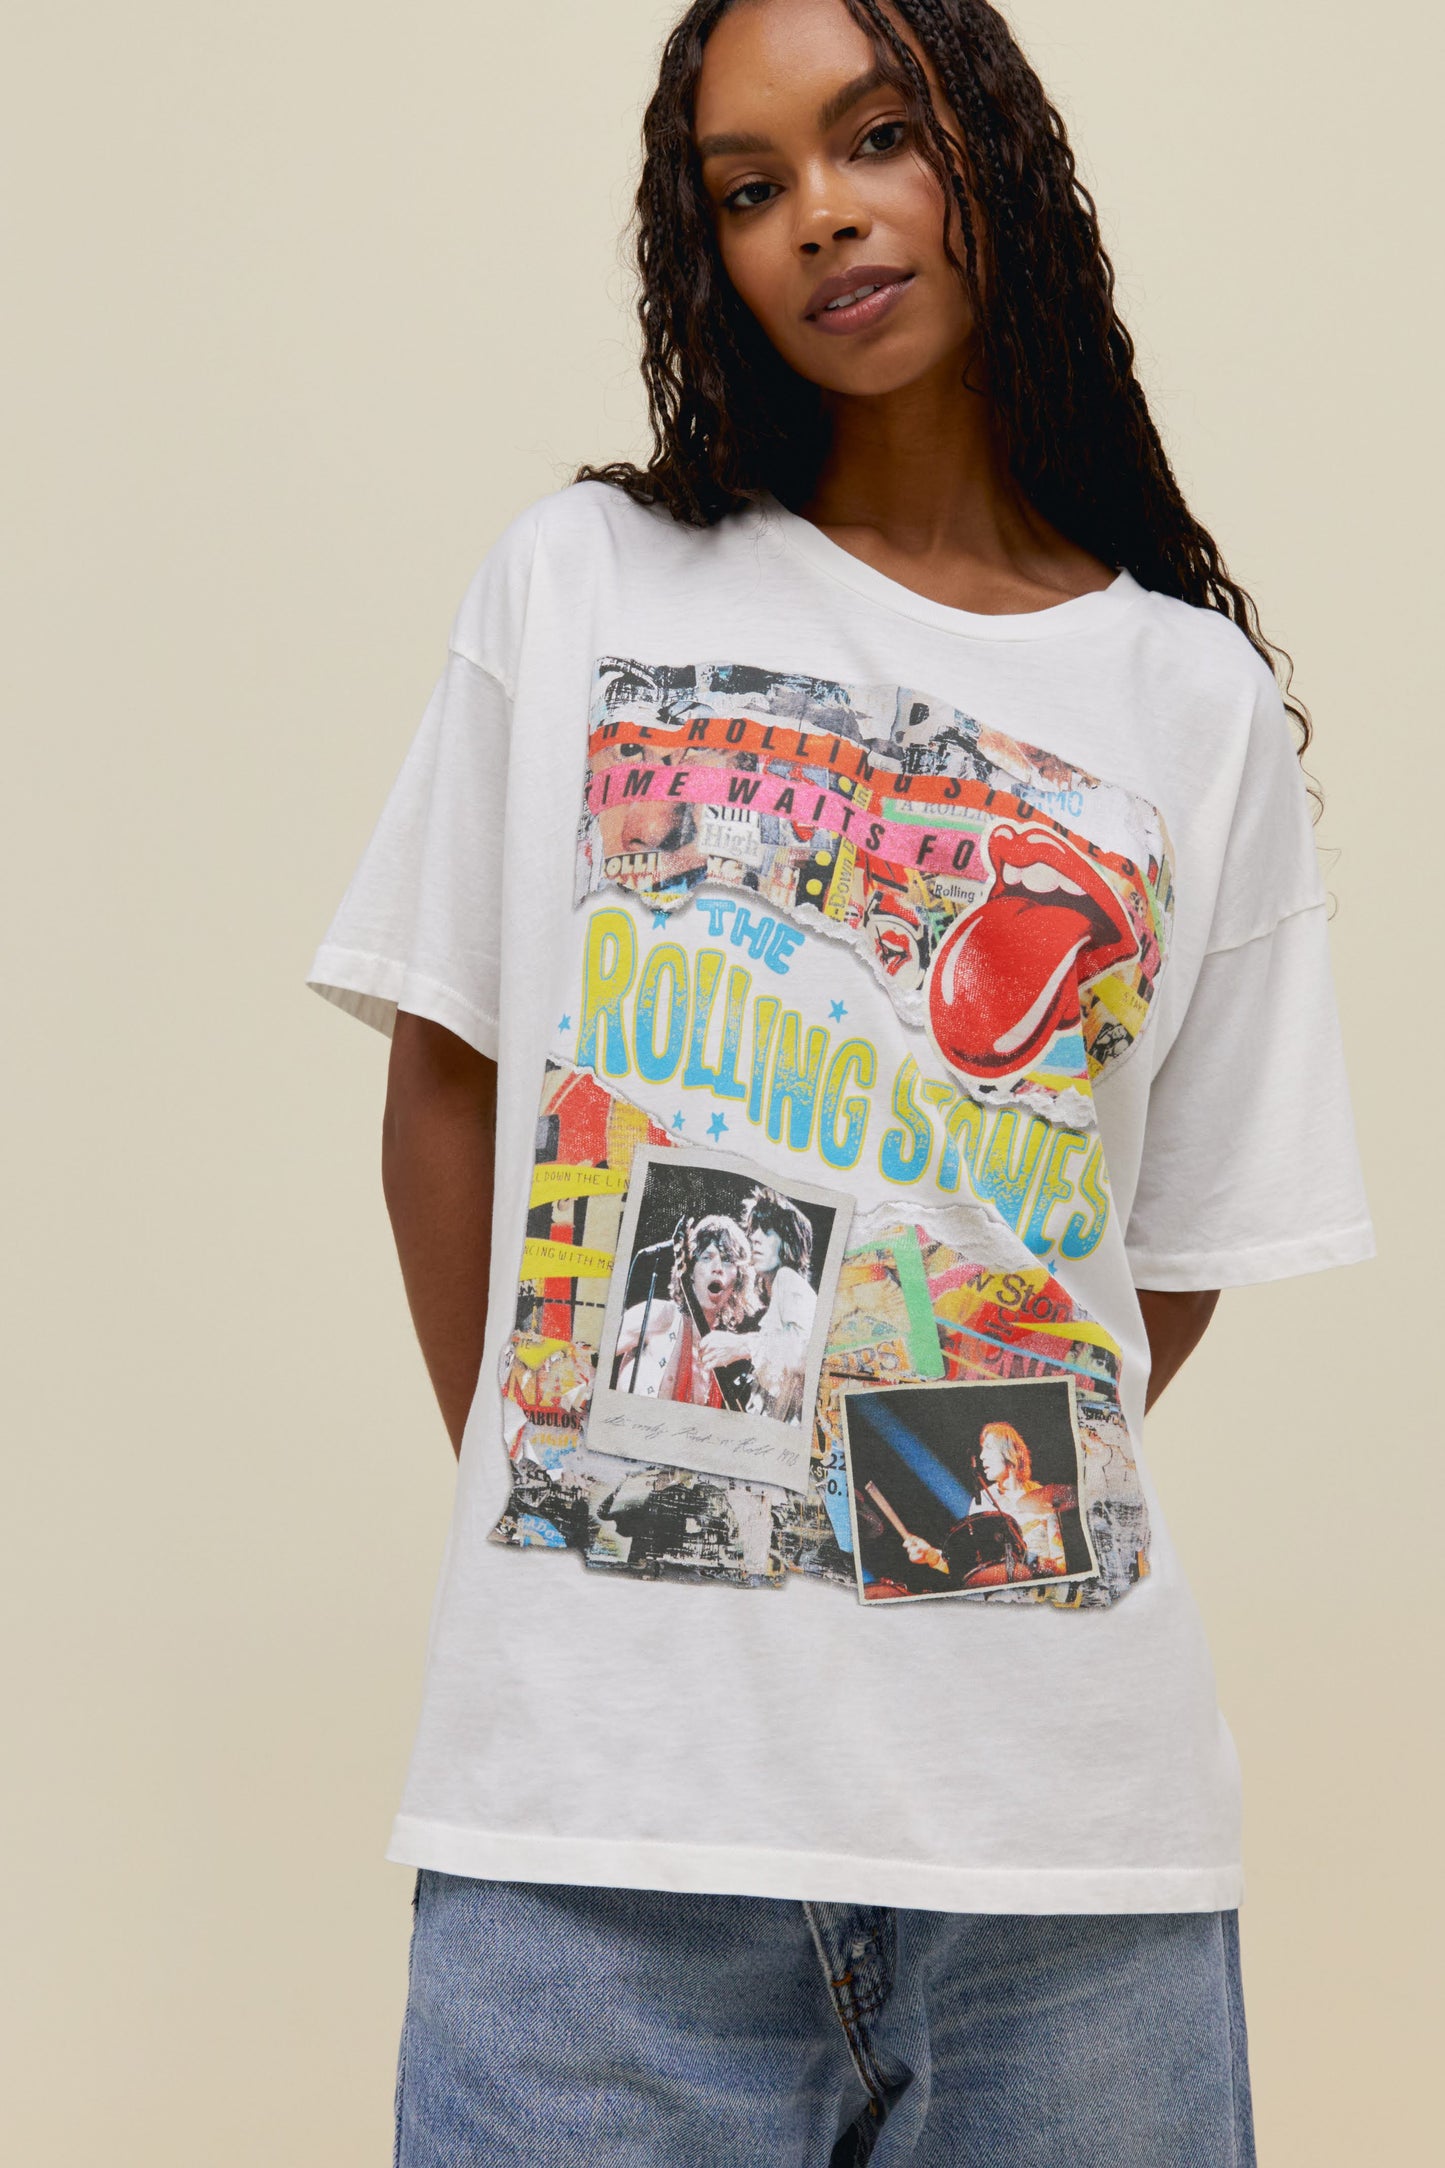 A model featuring a white tee stamped with 'The Rolling Stones' wiith collage pictures of the band performing at concerts.